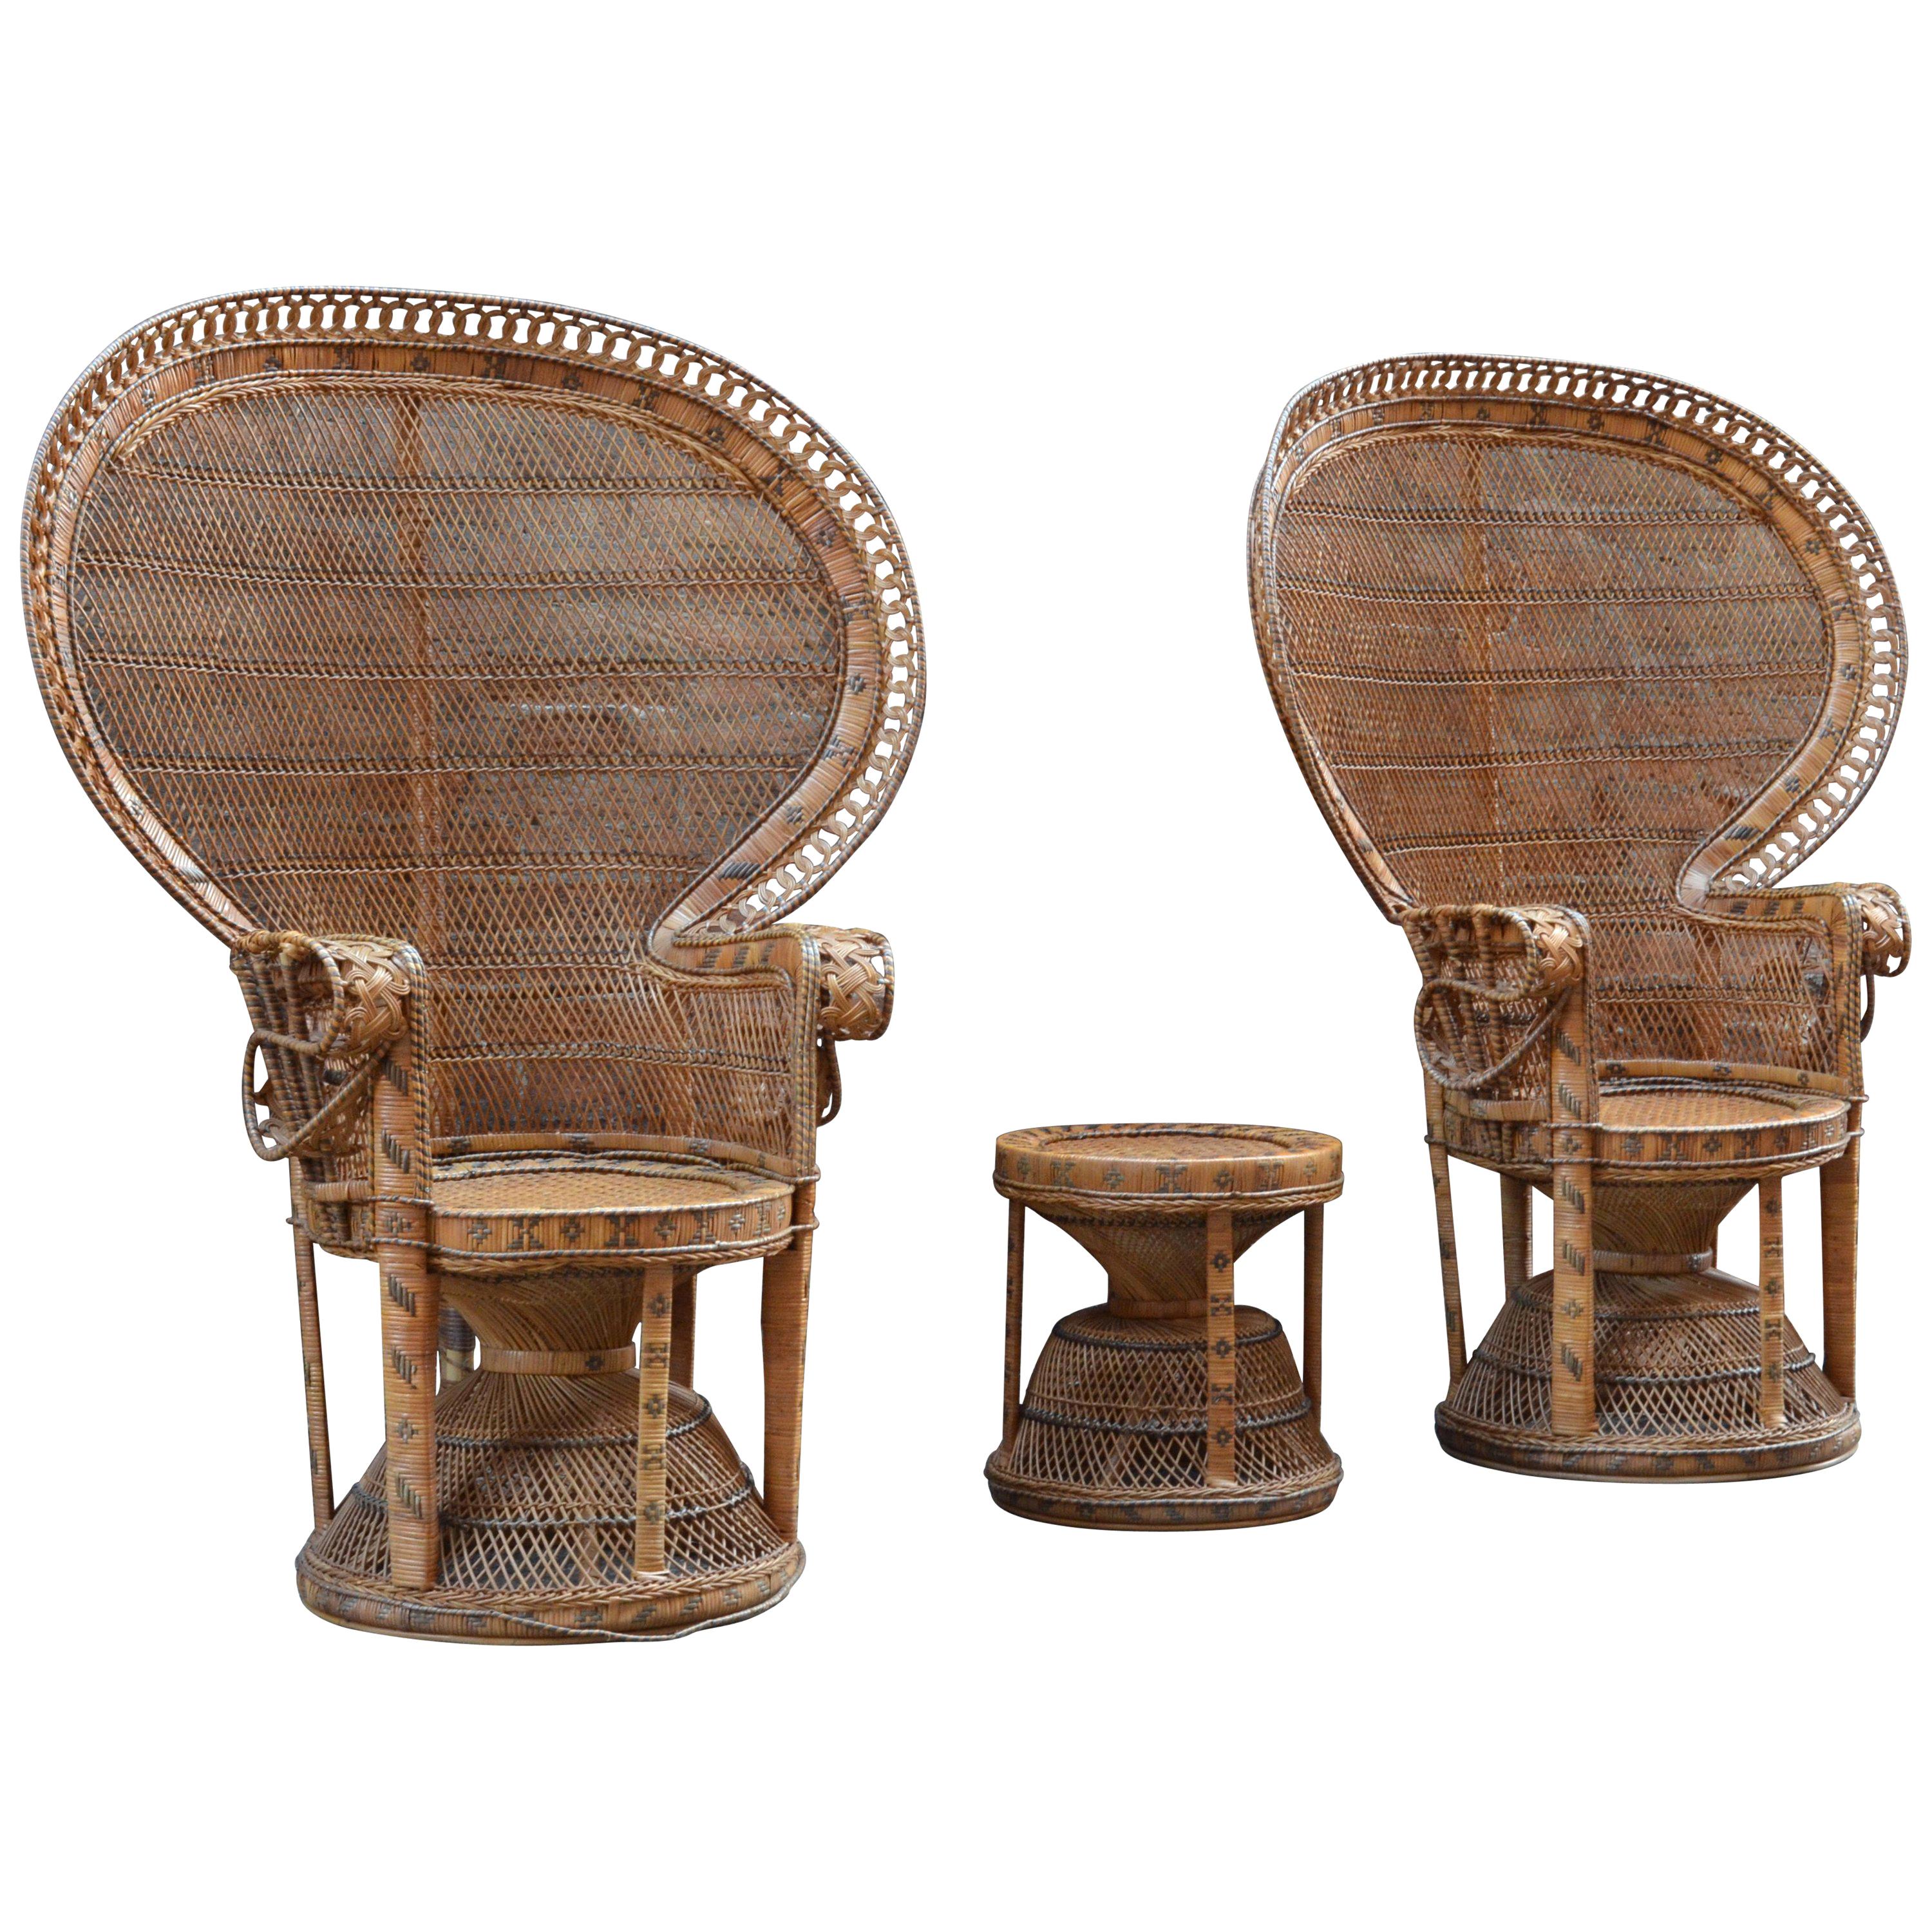 Pair of rattan and wicker peacock armchairs with matched stool. They are form 1970s and come from Italy. Featuring a full fan back, these handwoven chairs were designed at the height of the Hollywood Regency. With their shape and big dimensions they